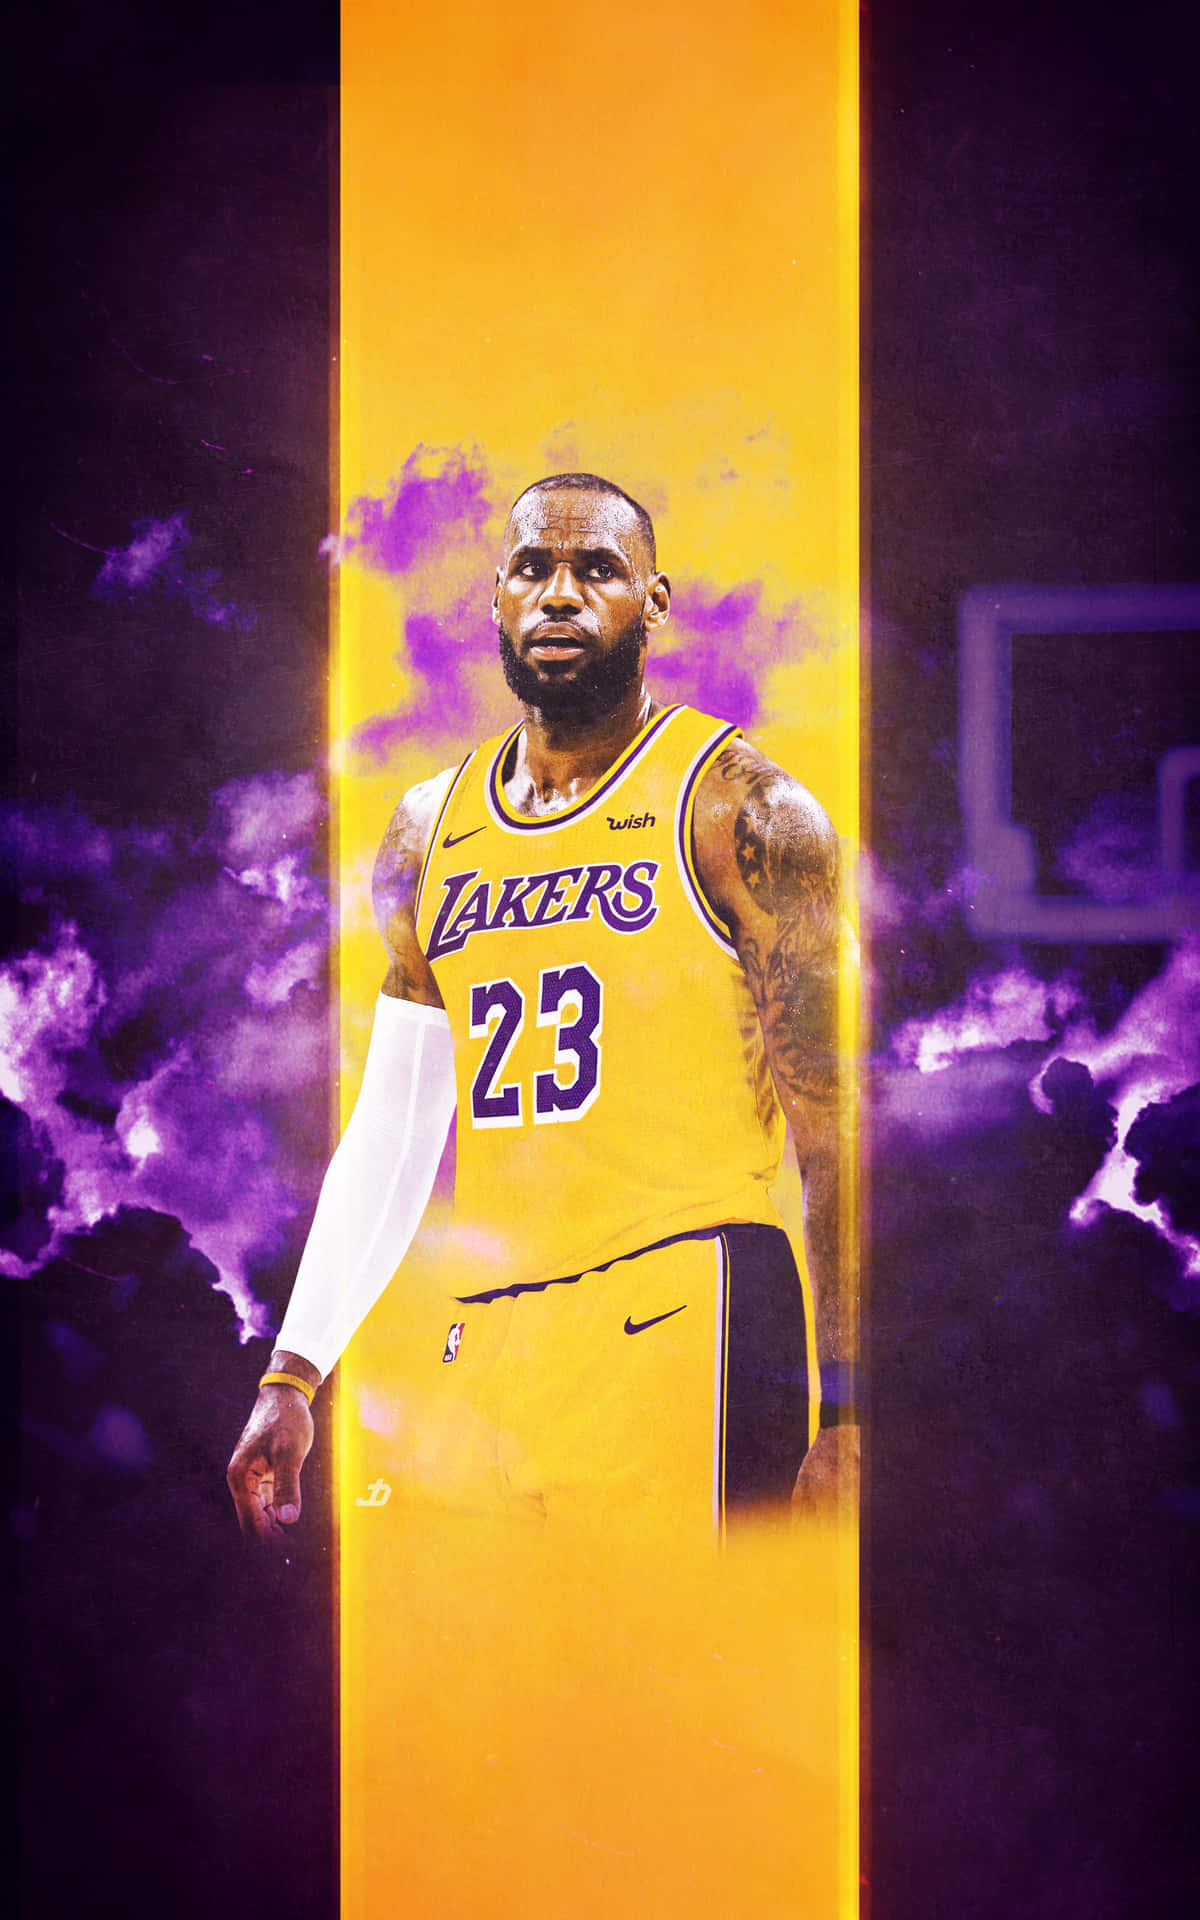 Lebron James breaking barriers with his newly released iPhone Wallpaper